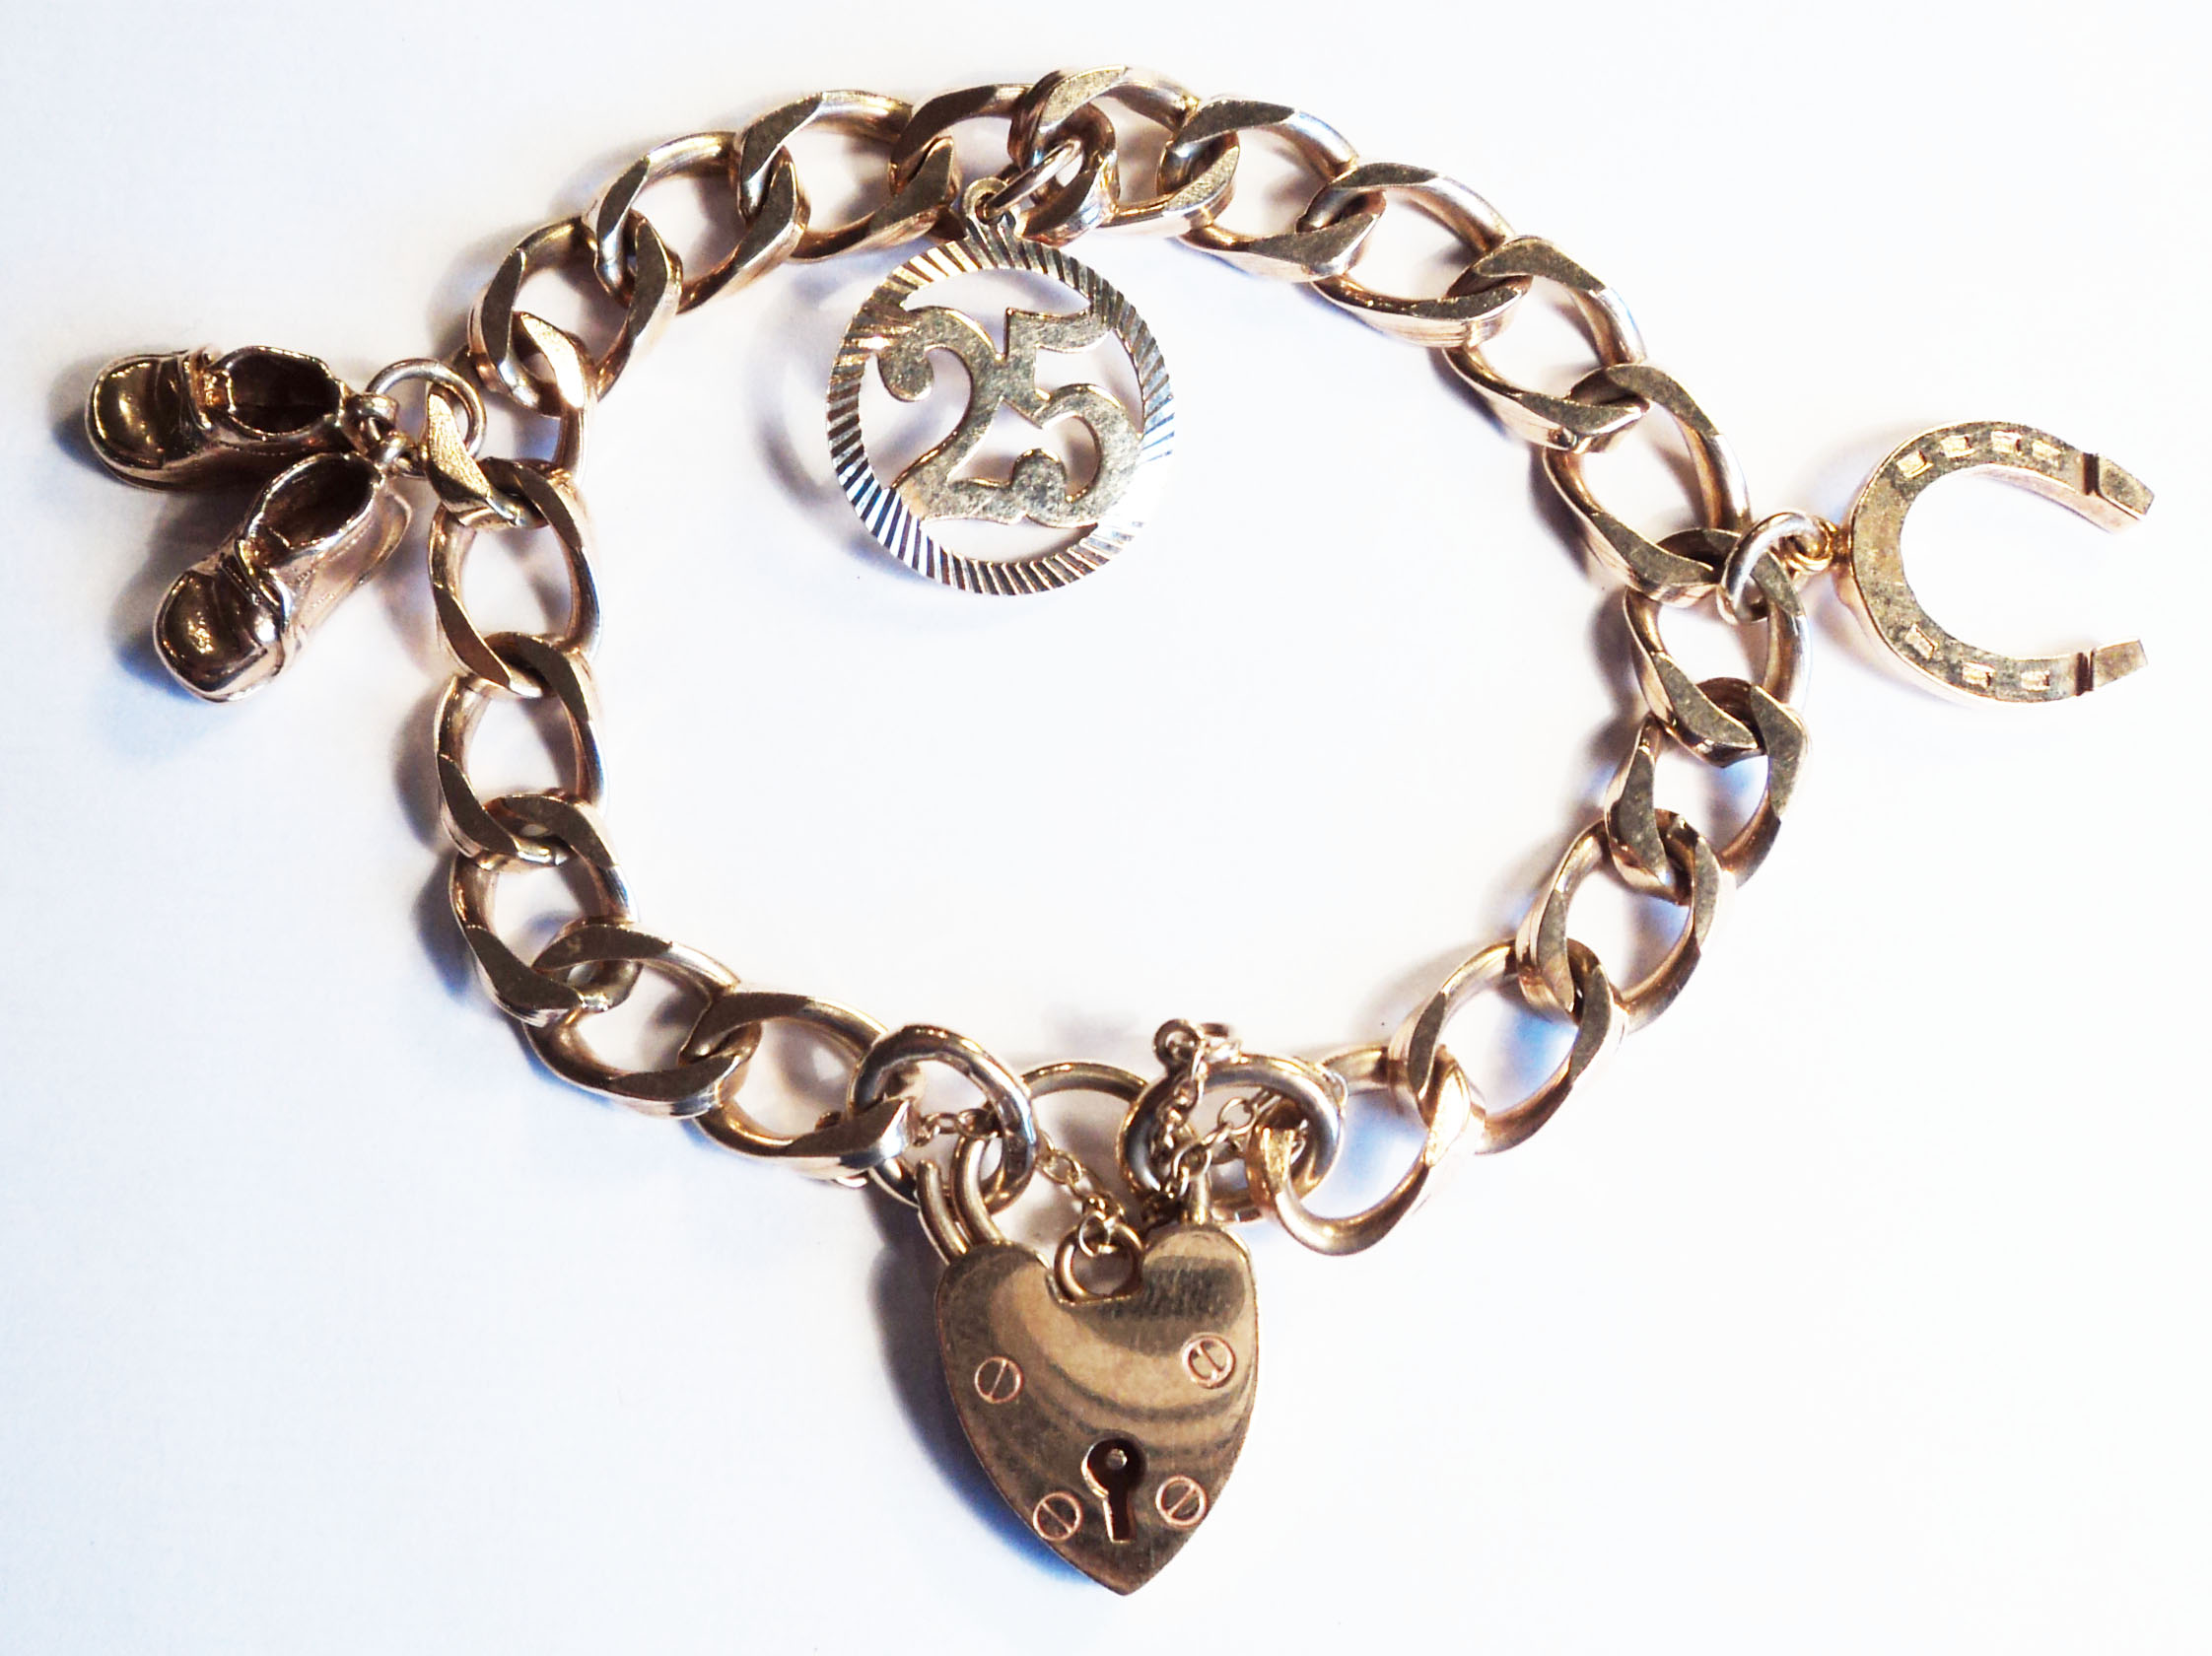 A 9ct. gold kerb-link charm bracelet, with heart shaped padlock and safety chain